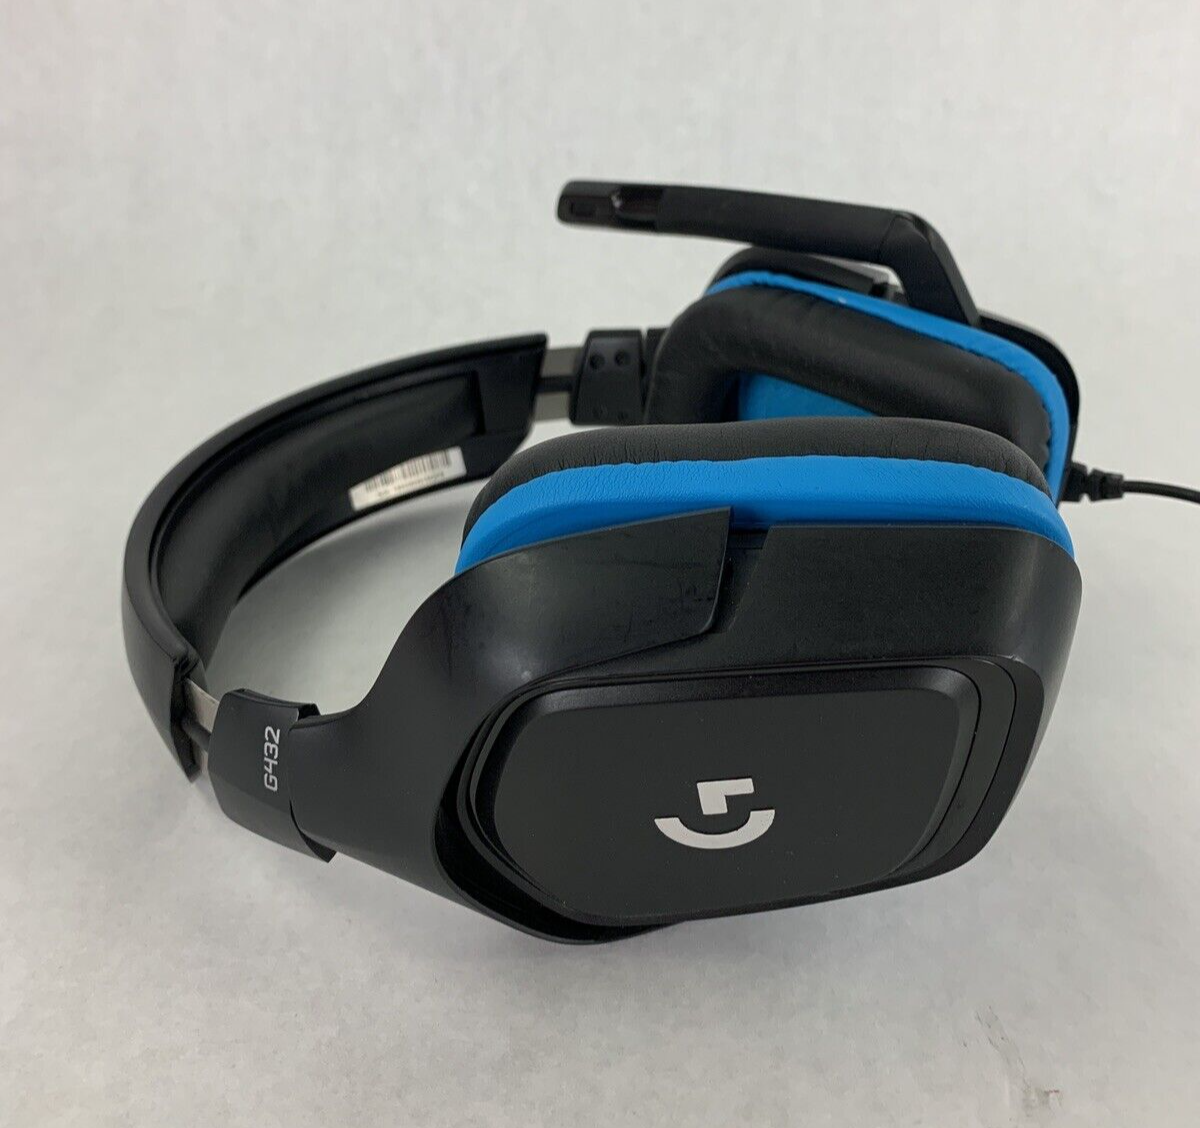 Logitech G432 3.5mm Wired Surround Sound Gaming Headset Black/Blue Tested